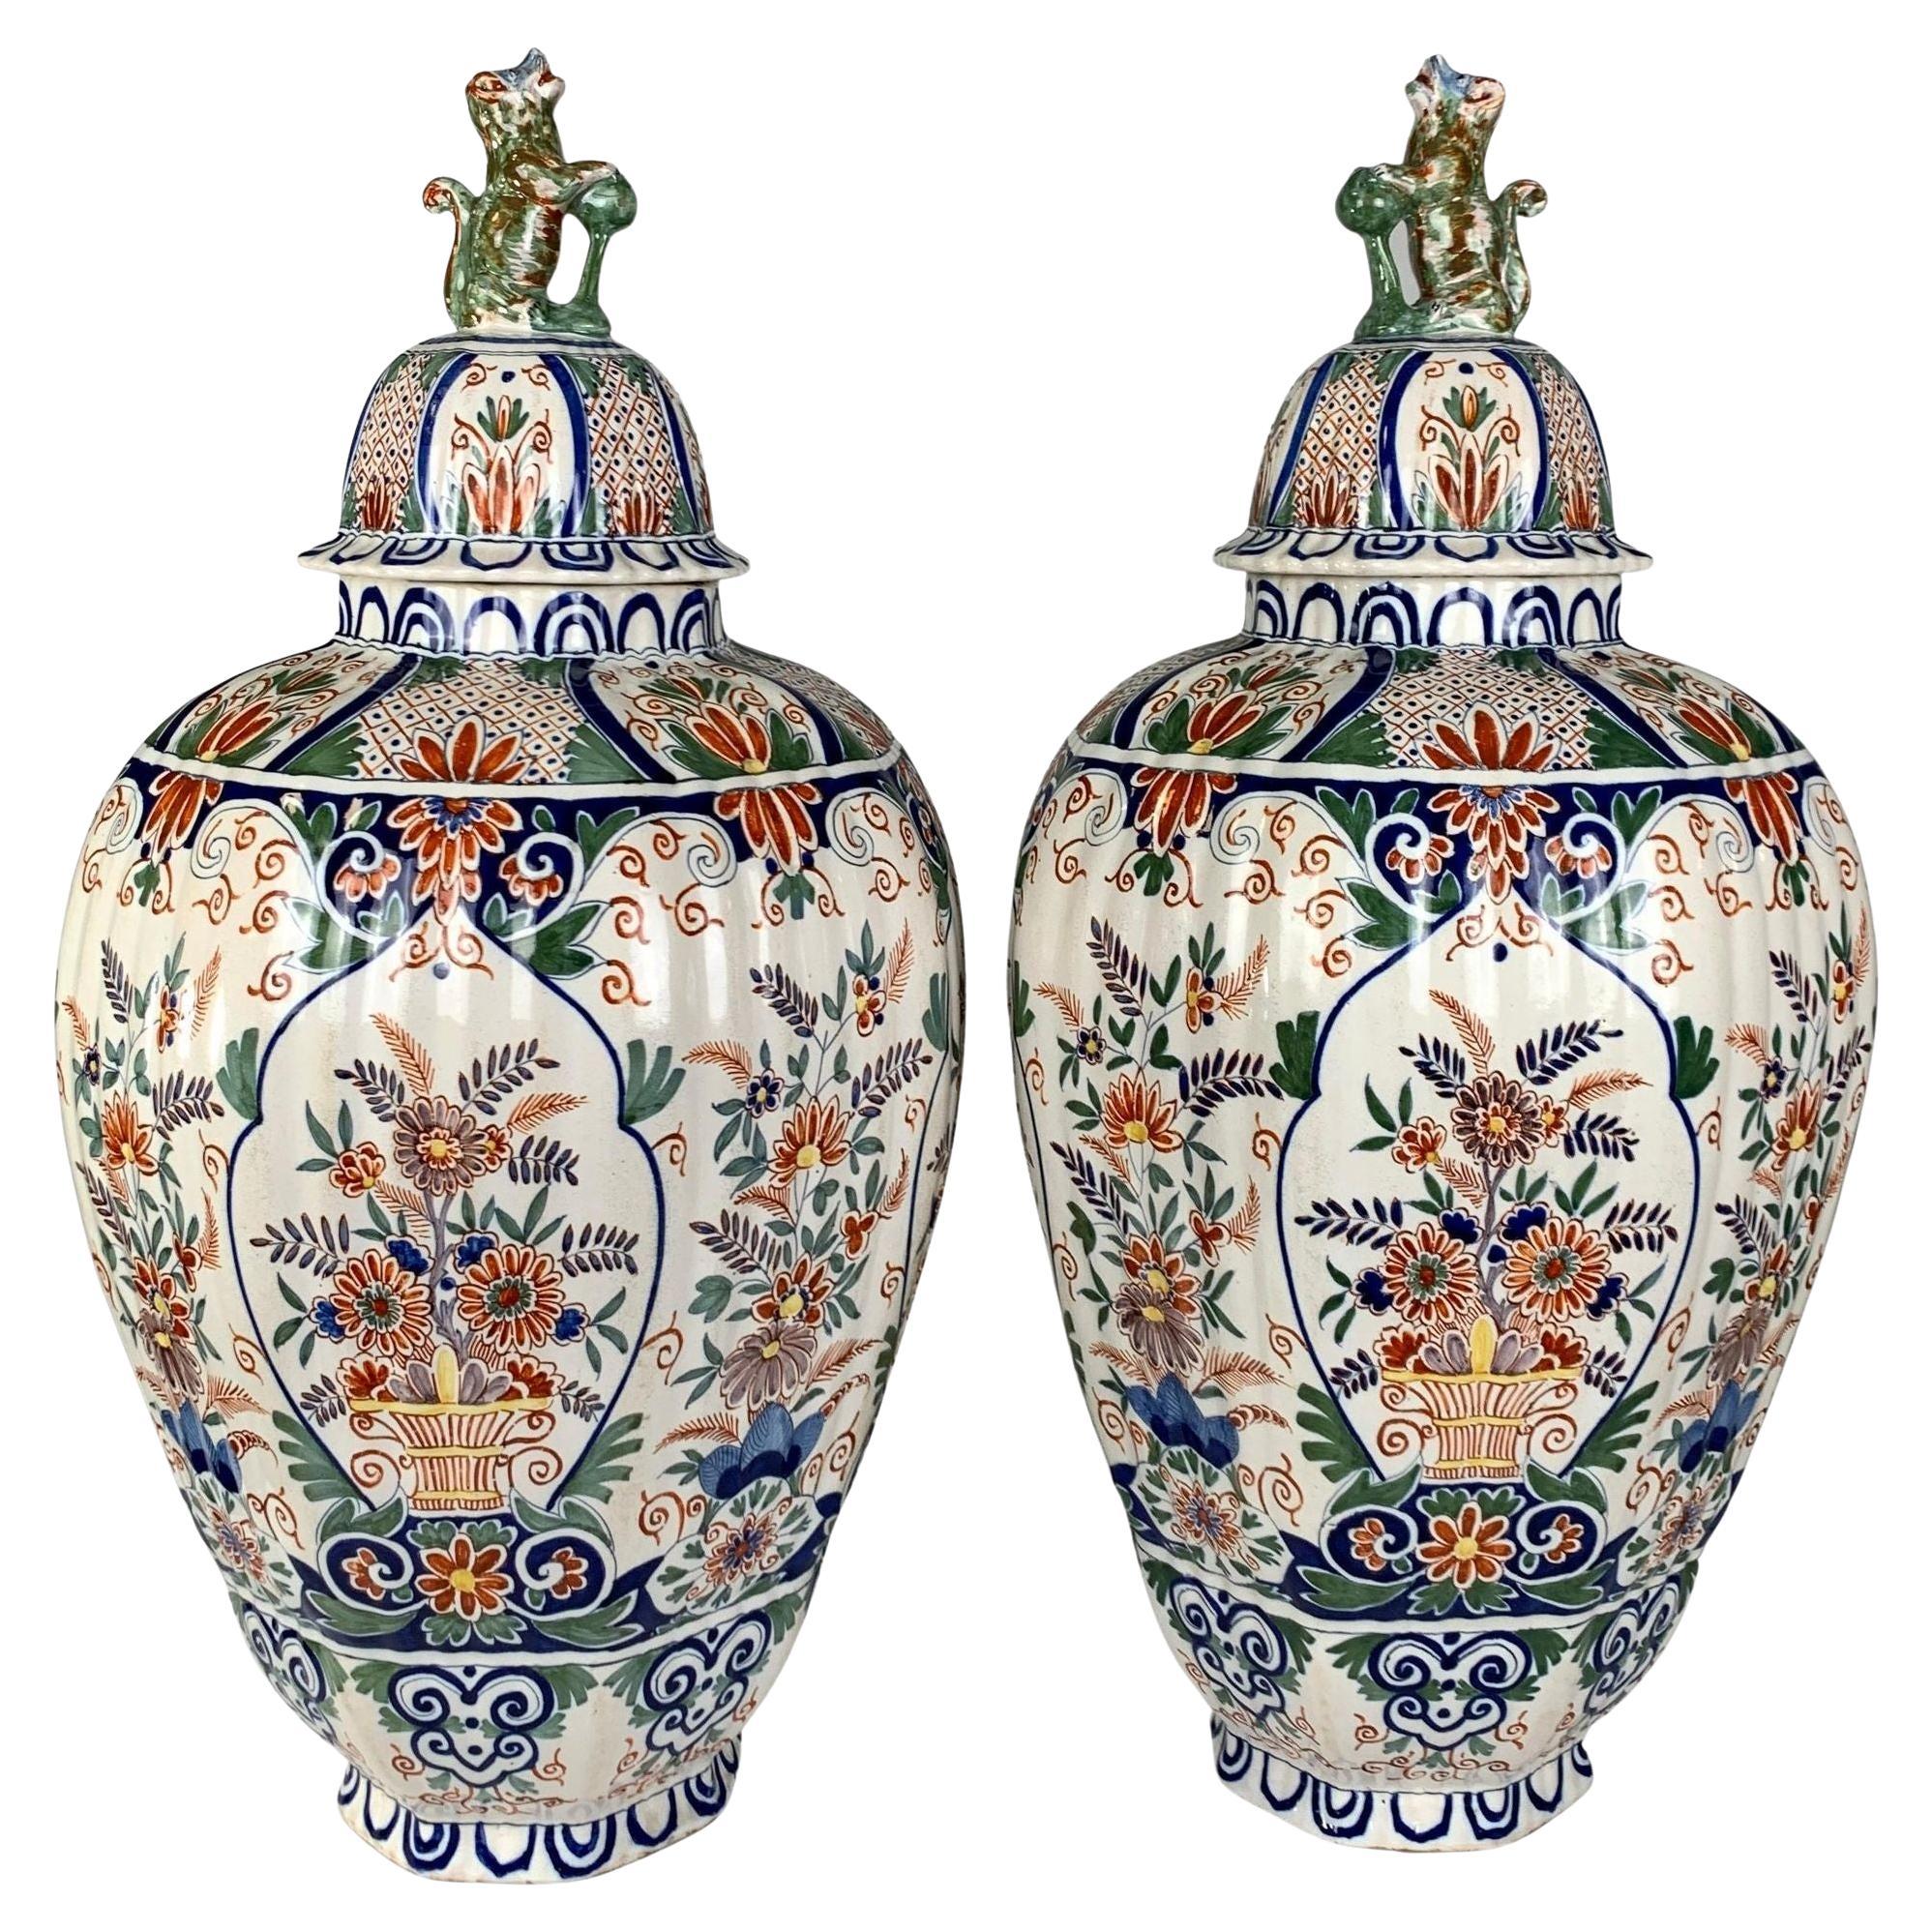 Pair Massive Delft Jars Hand Painted in Polychrome Decoration Netherlands C-1880